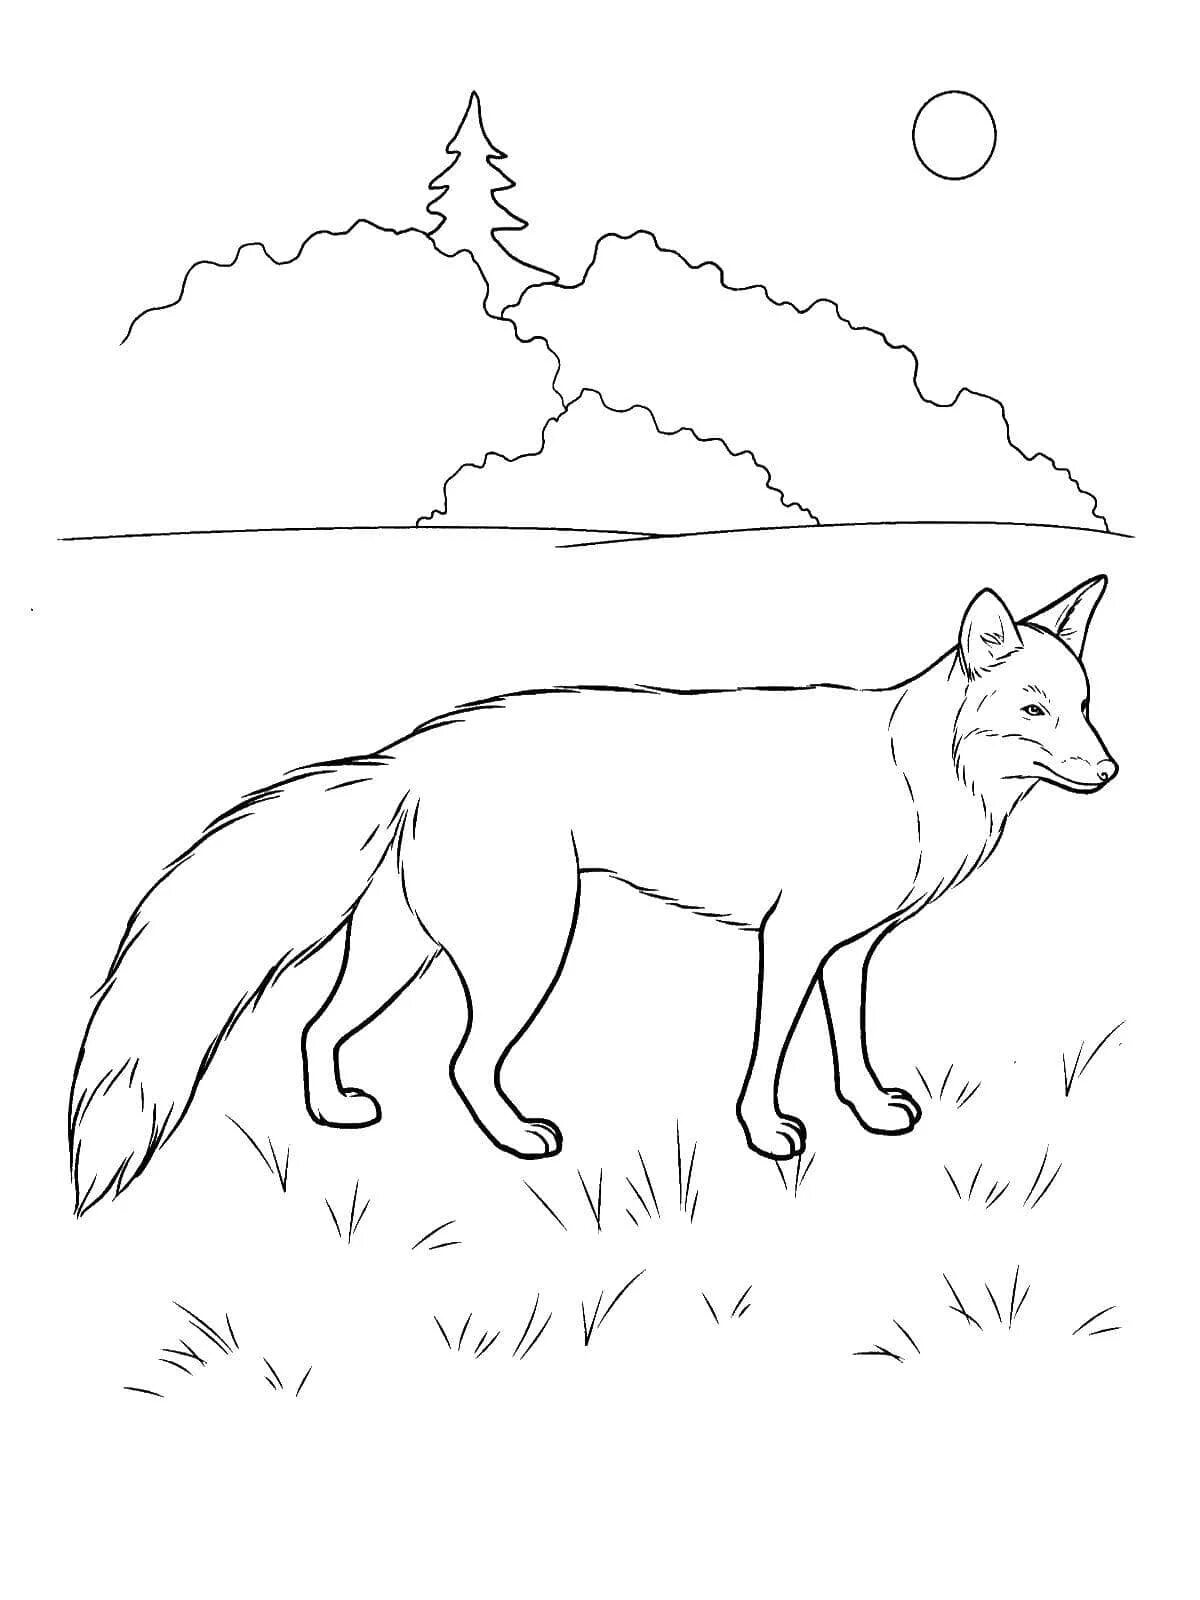 Fox in the forest #3